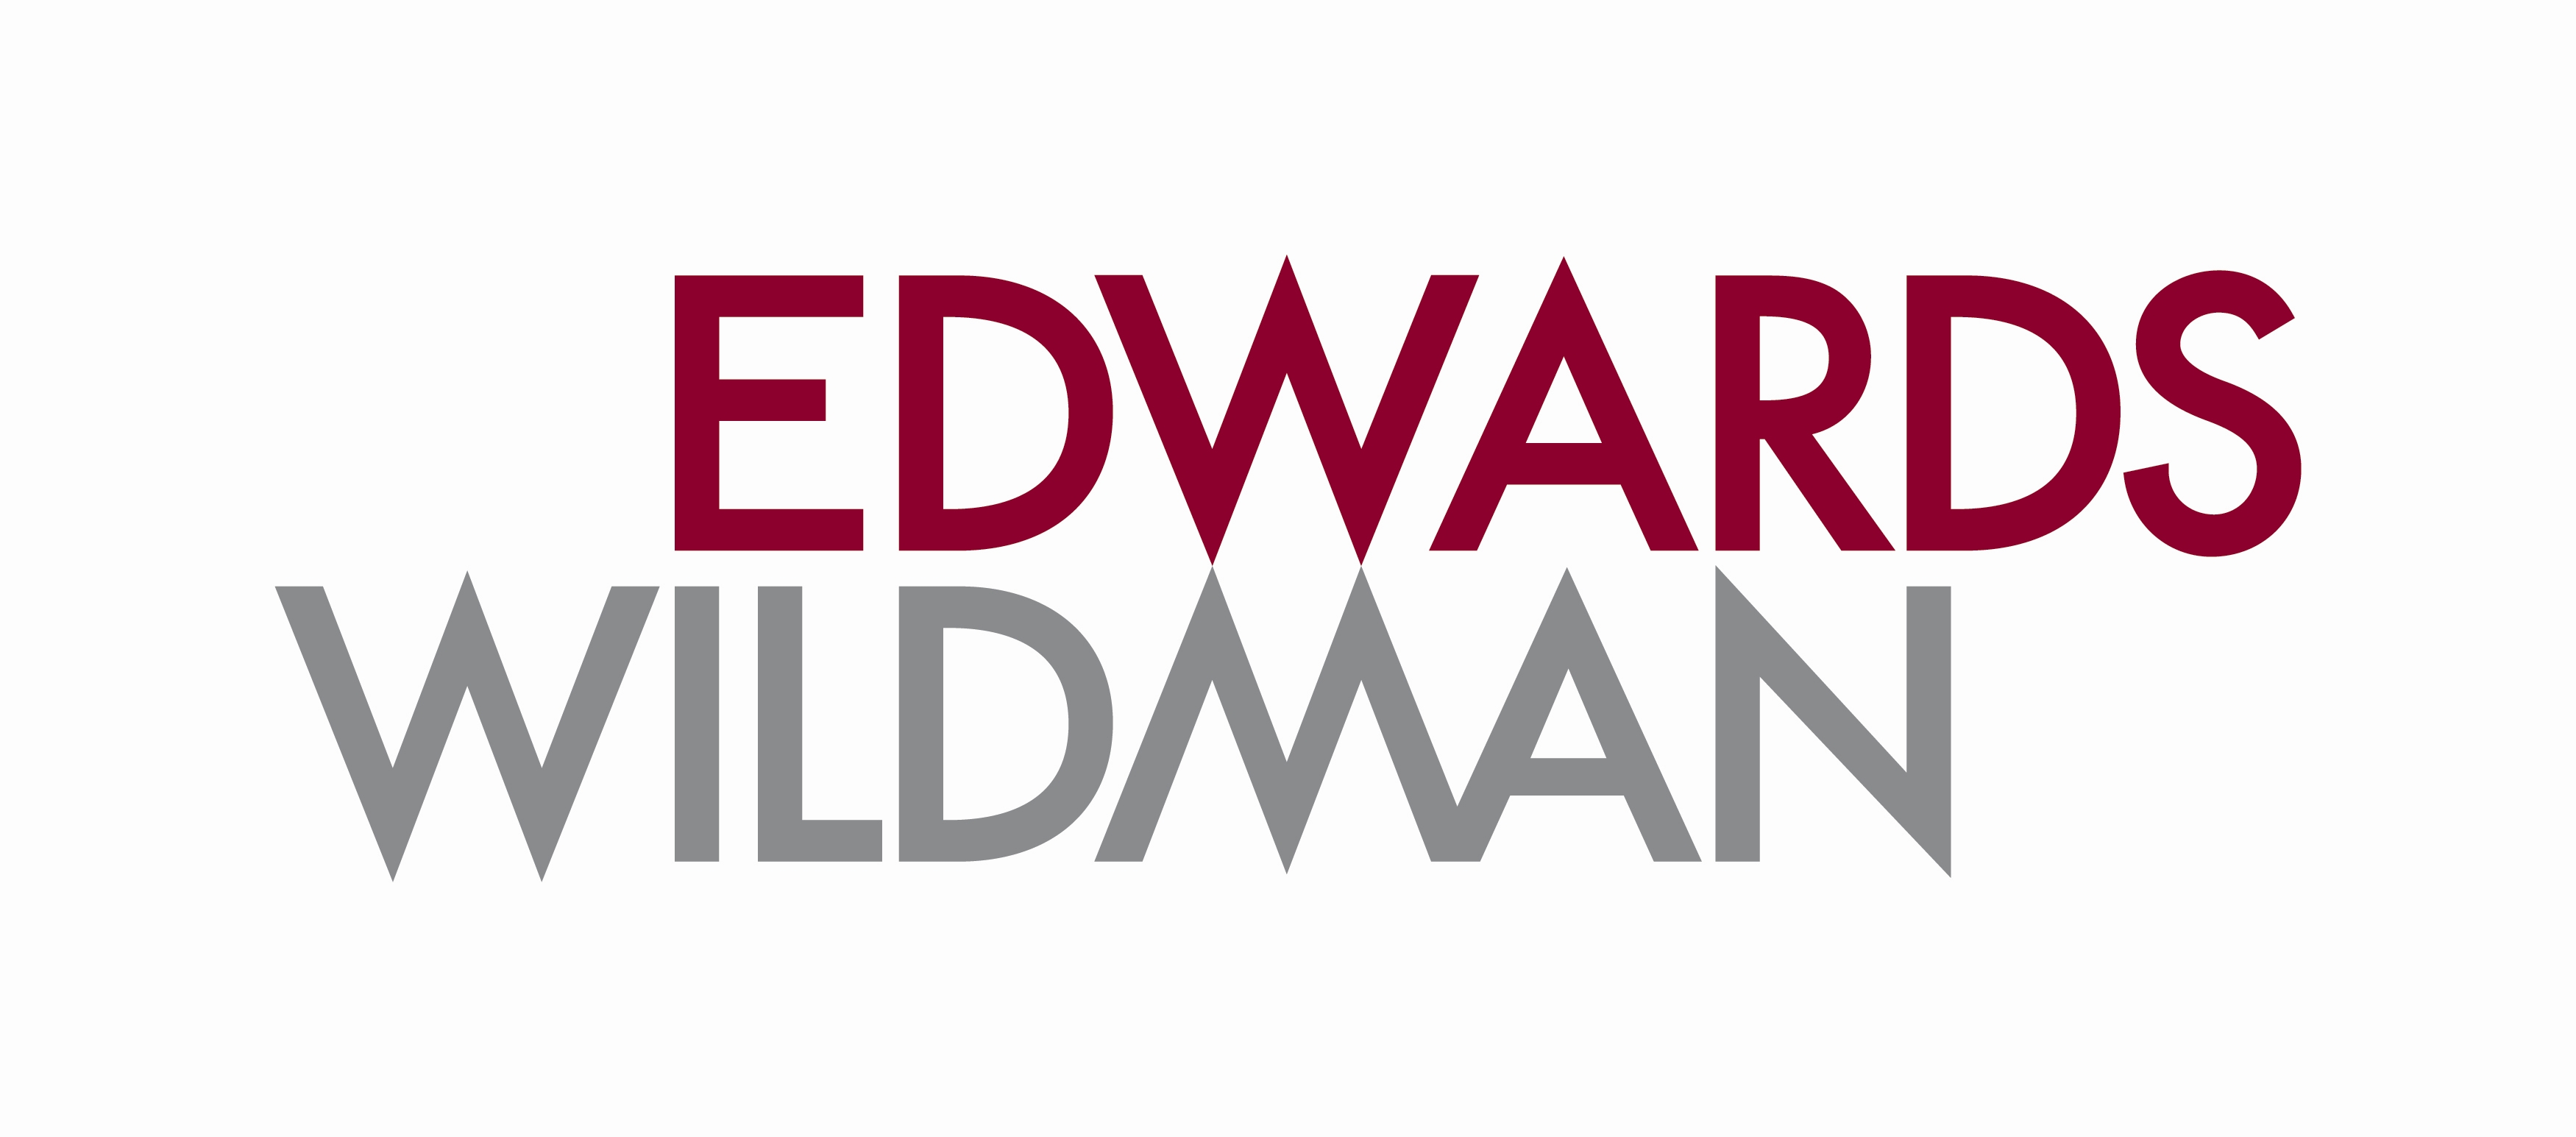 Edwards Wildman will supply legal services to the London Lions Basketball Club and Sports Foundation